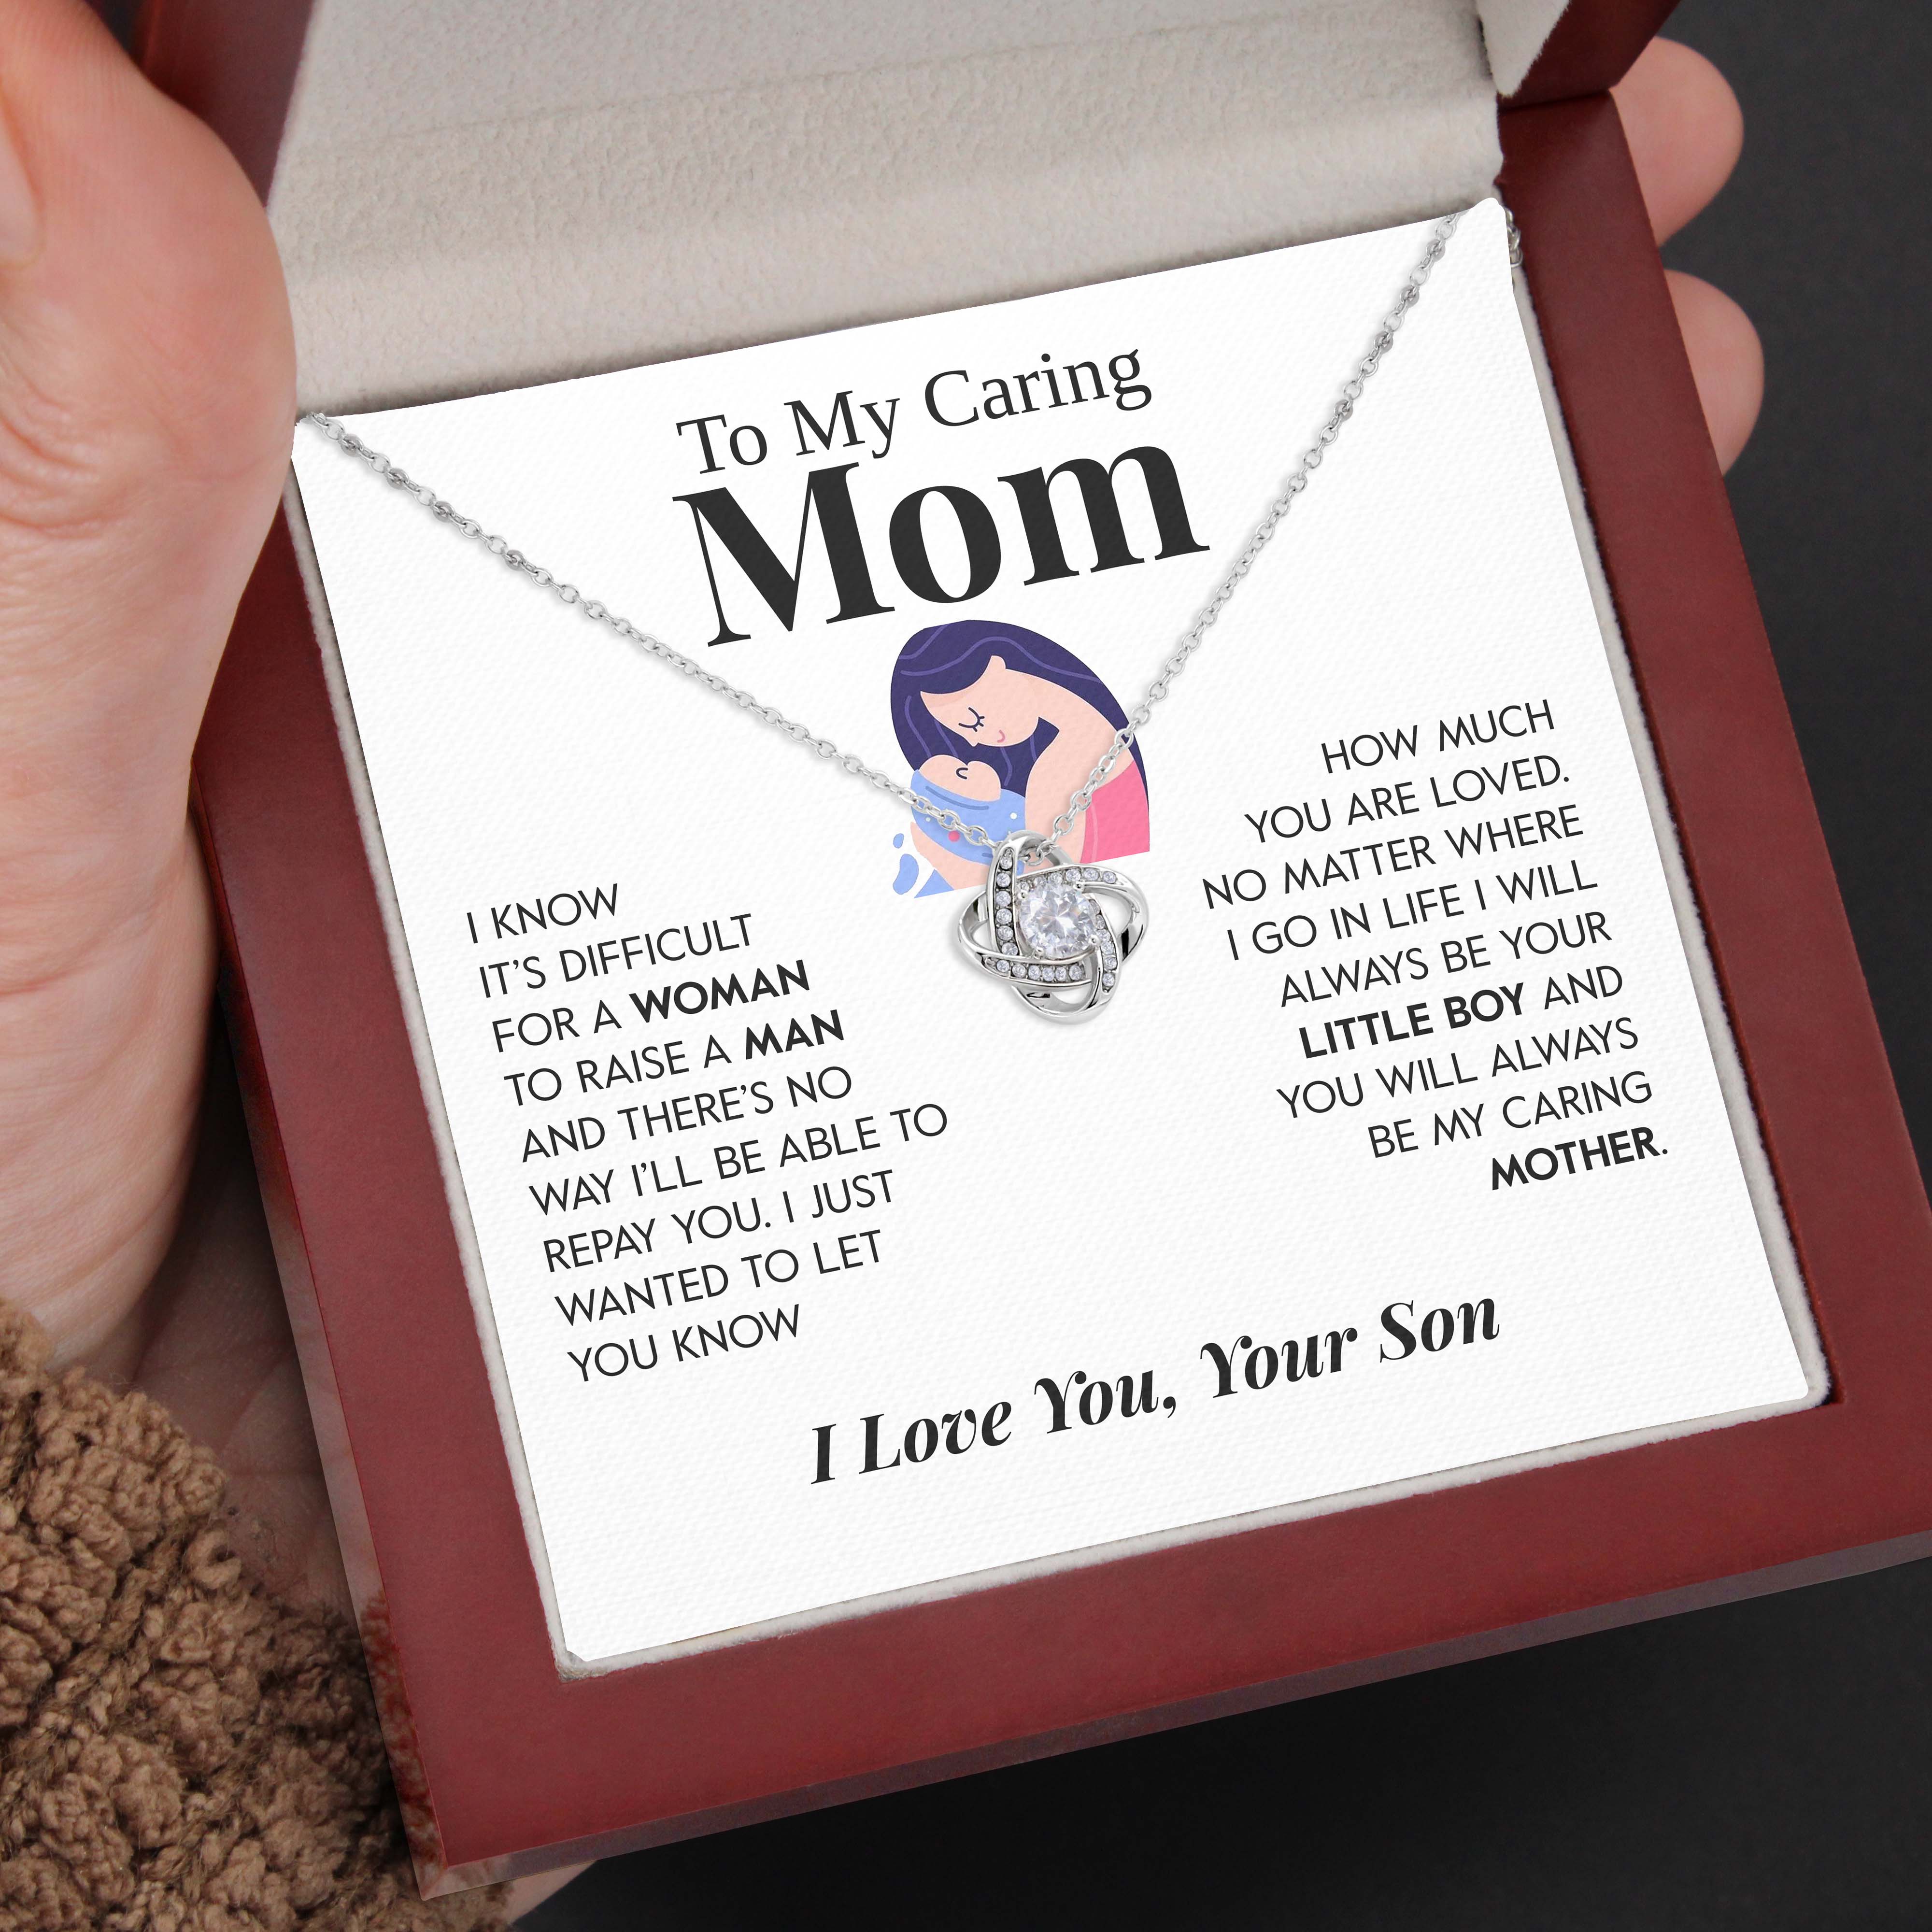 To My Caring Mom | "Your Little Boy" | Love Knot Necklace